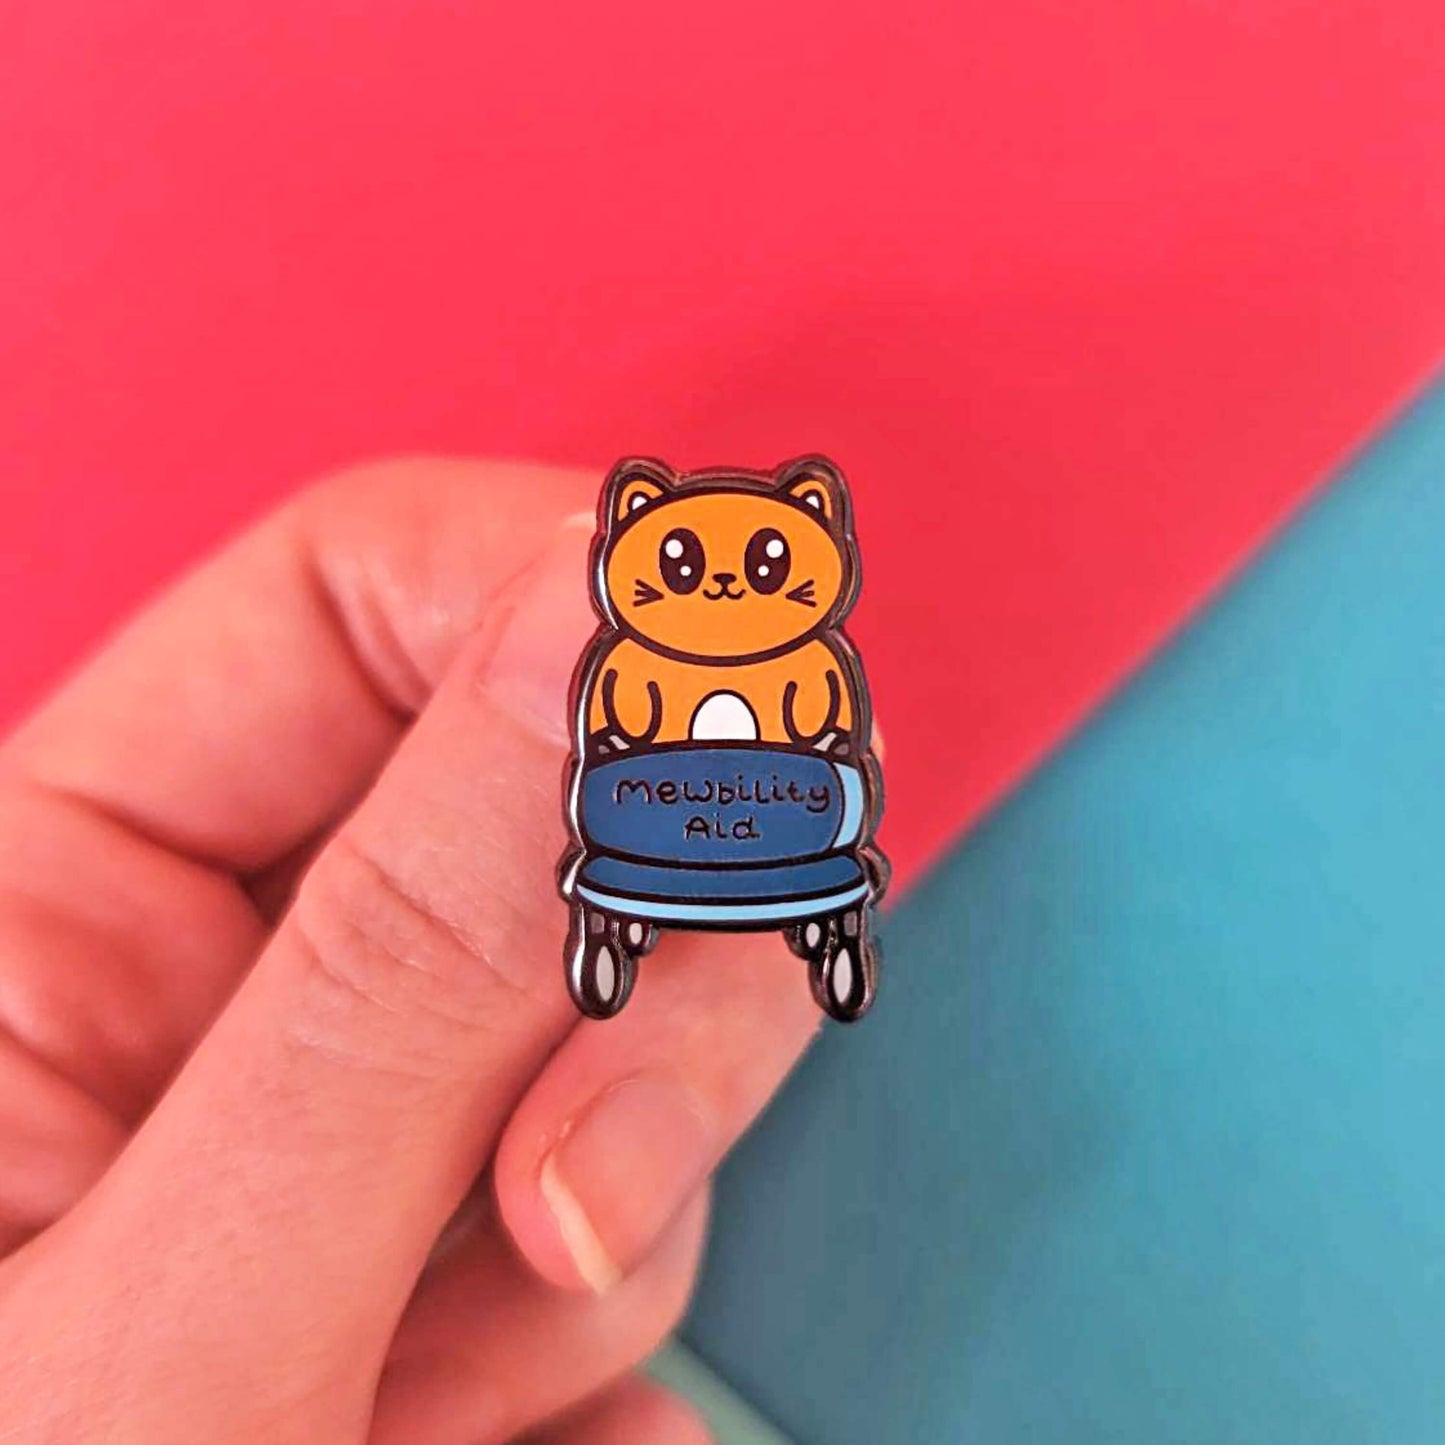 The Mewbility Aid Cat Enamel Pin - Mobility Aid held over a red and blue background. An orange smiling cat walking upright with a blue mobility aid, across the walking chair reads 'mewbility aid'. The hand drawn designs is raising awareness for mobility aids.